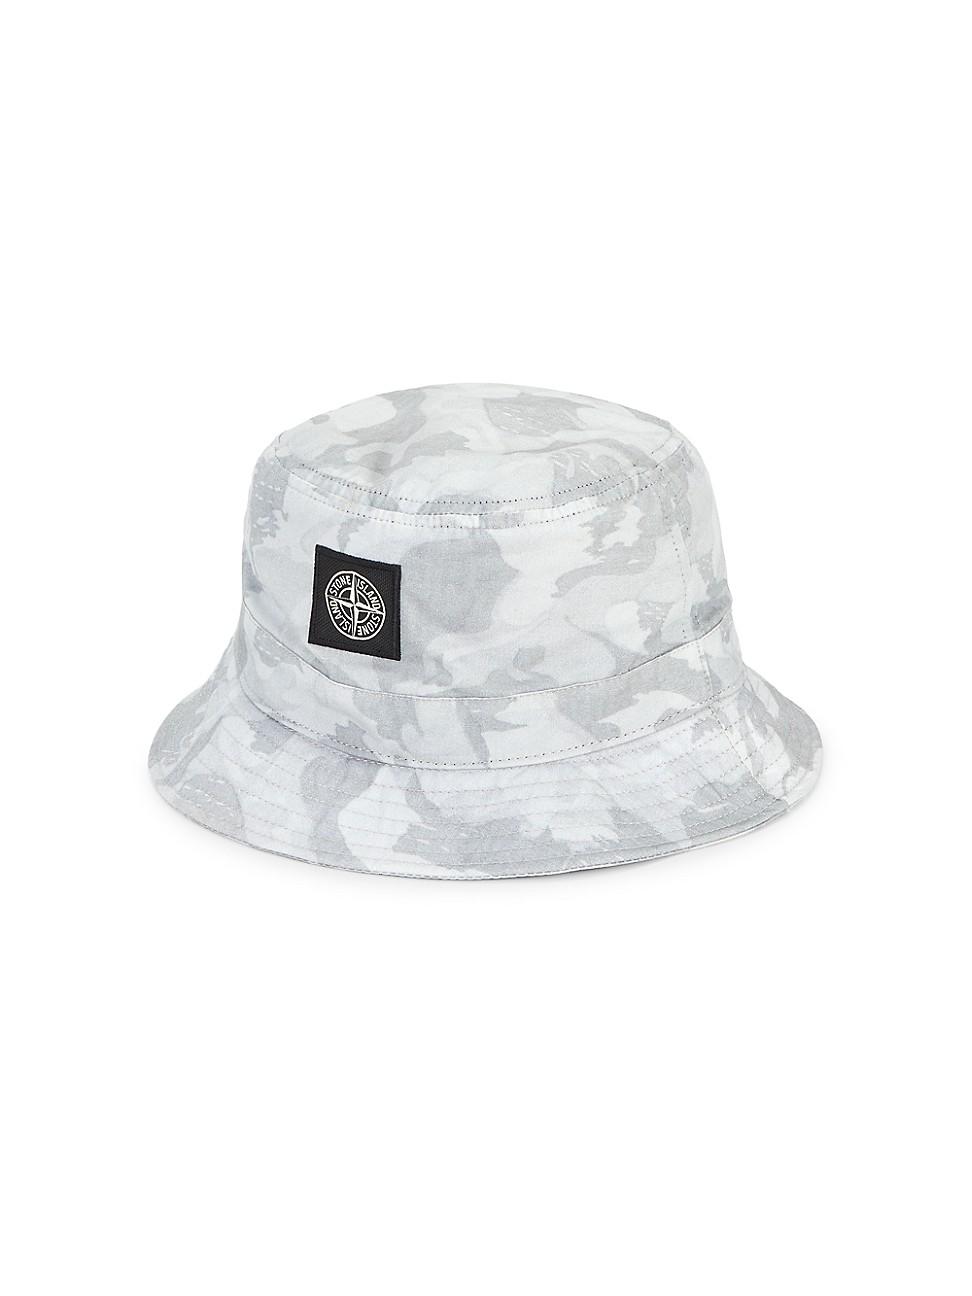 Stone Island Cotton Camouflage Bucket Hat in Sky Blue (Blue) for Men | Lyst